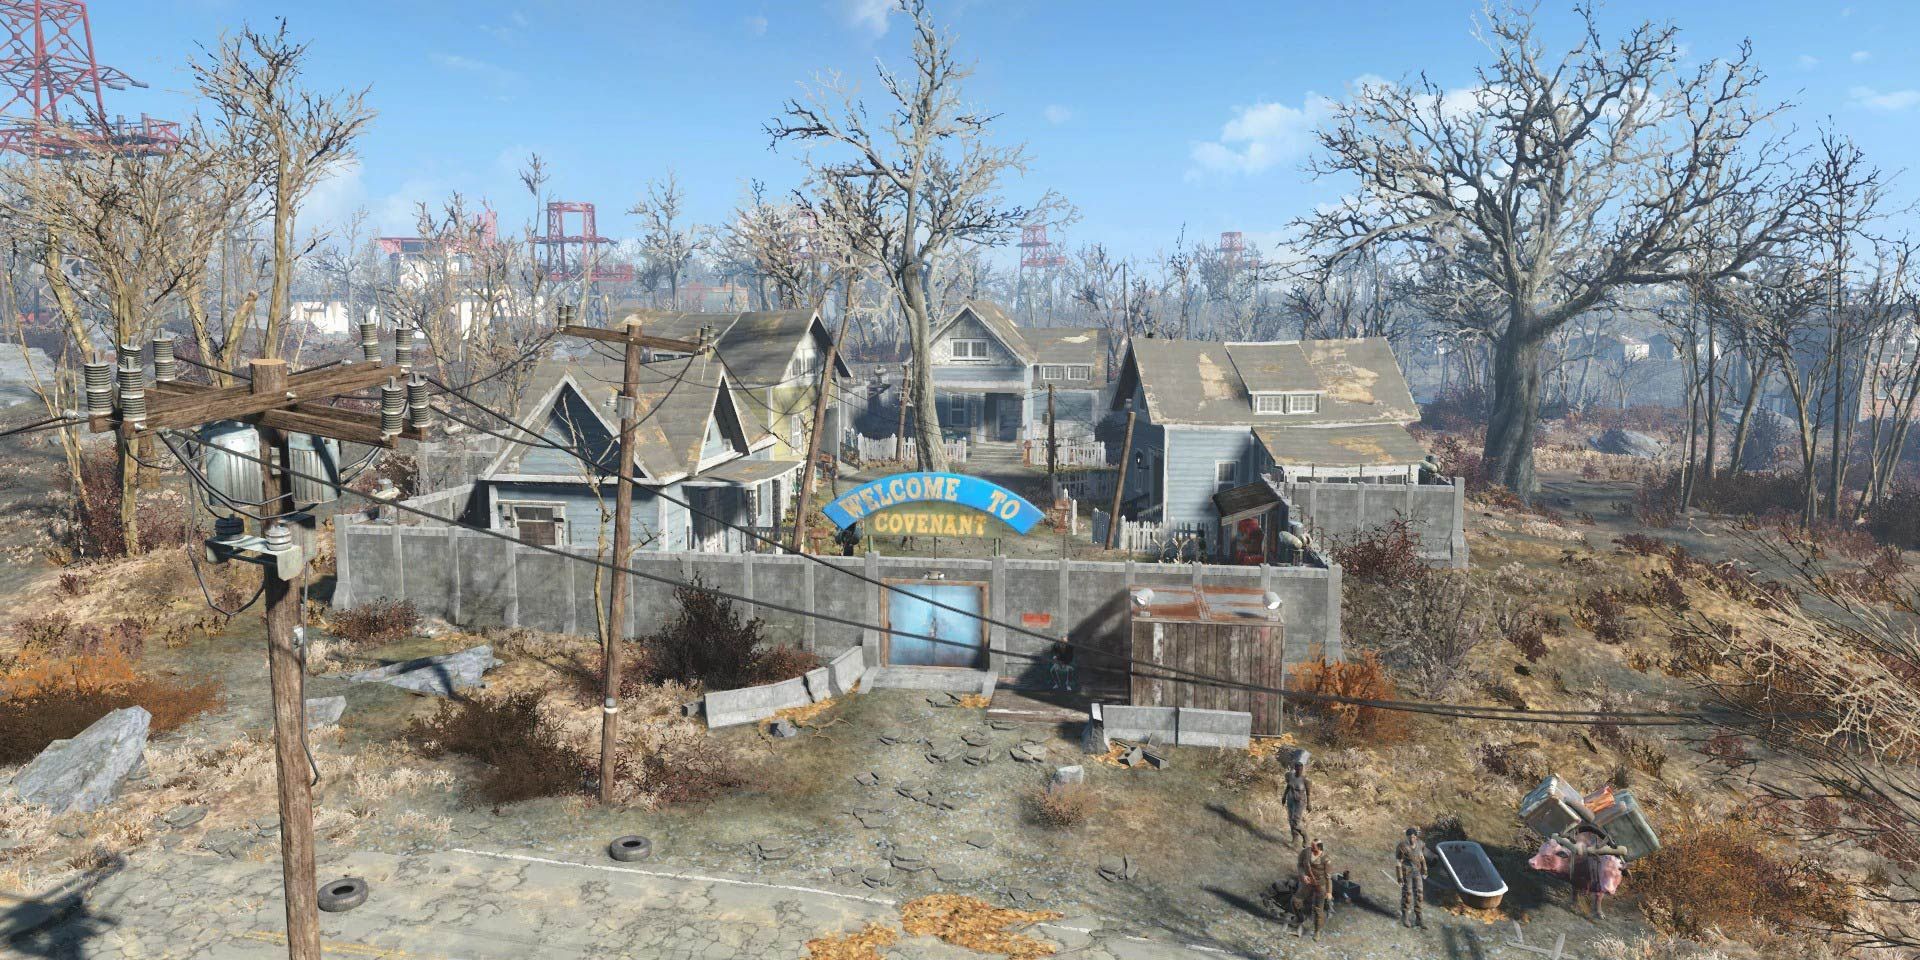 Covenant in Fallout 4; a sunny pre-war town.